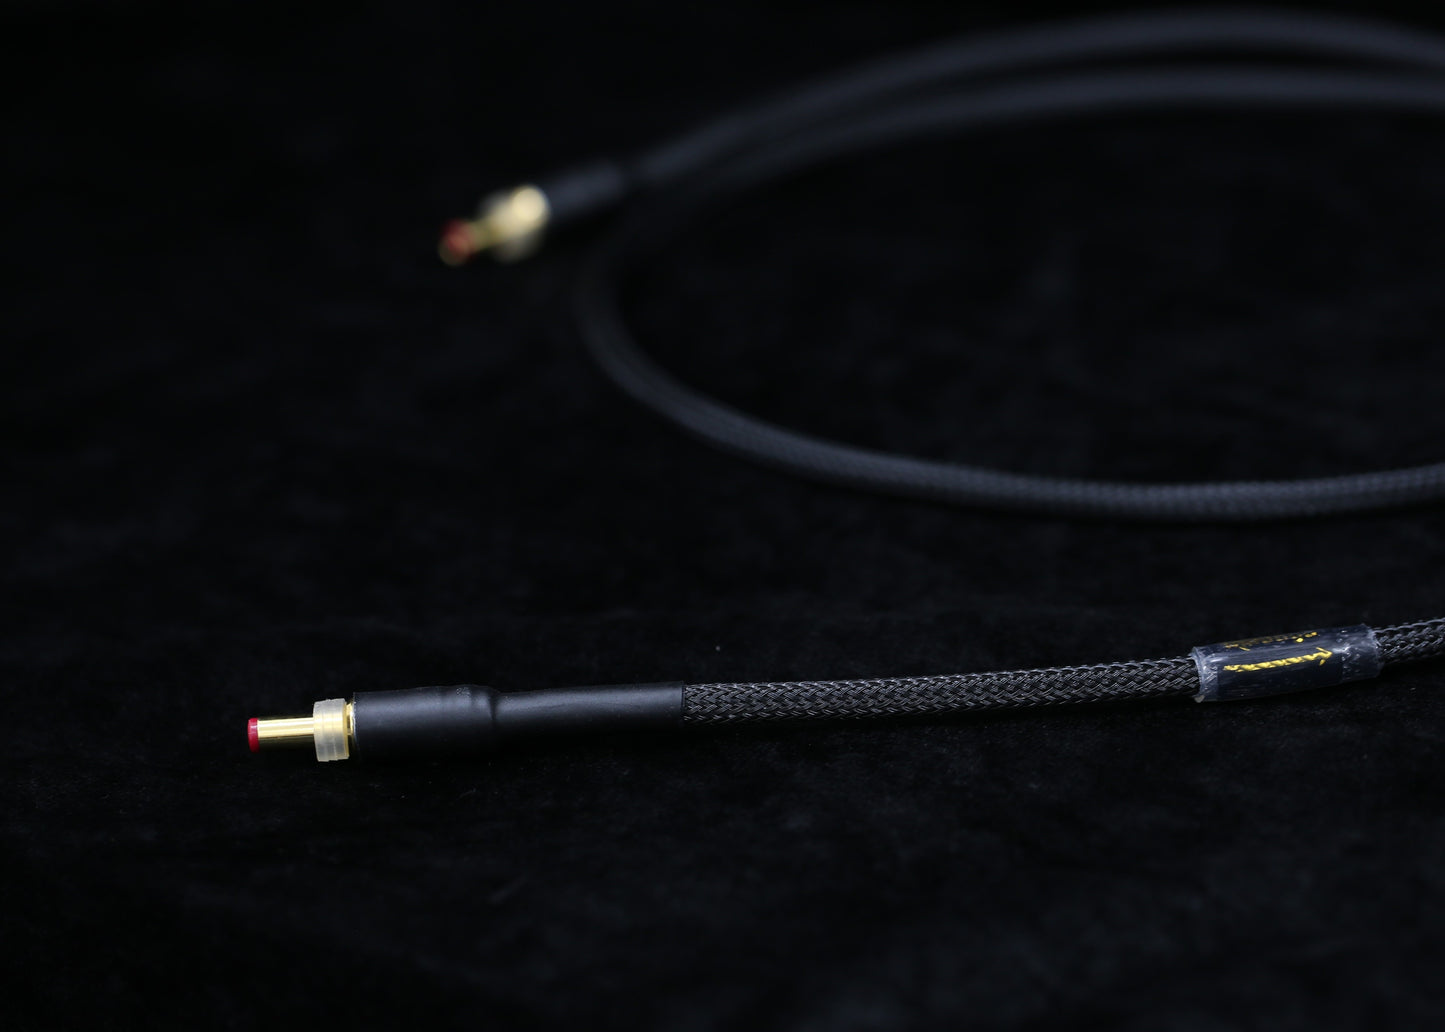 Ambago OOTC1 (2.5 - 2.5) DC Cable